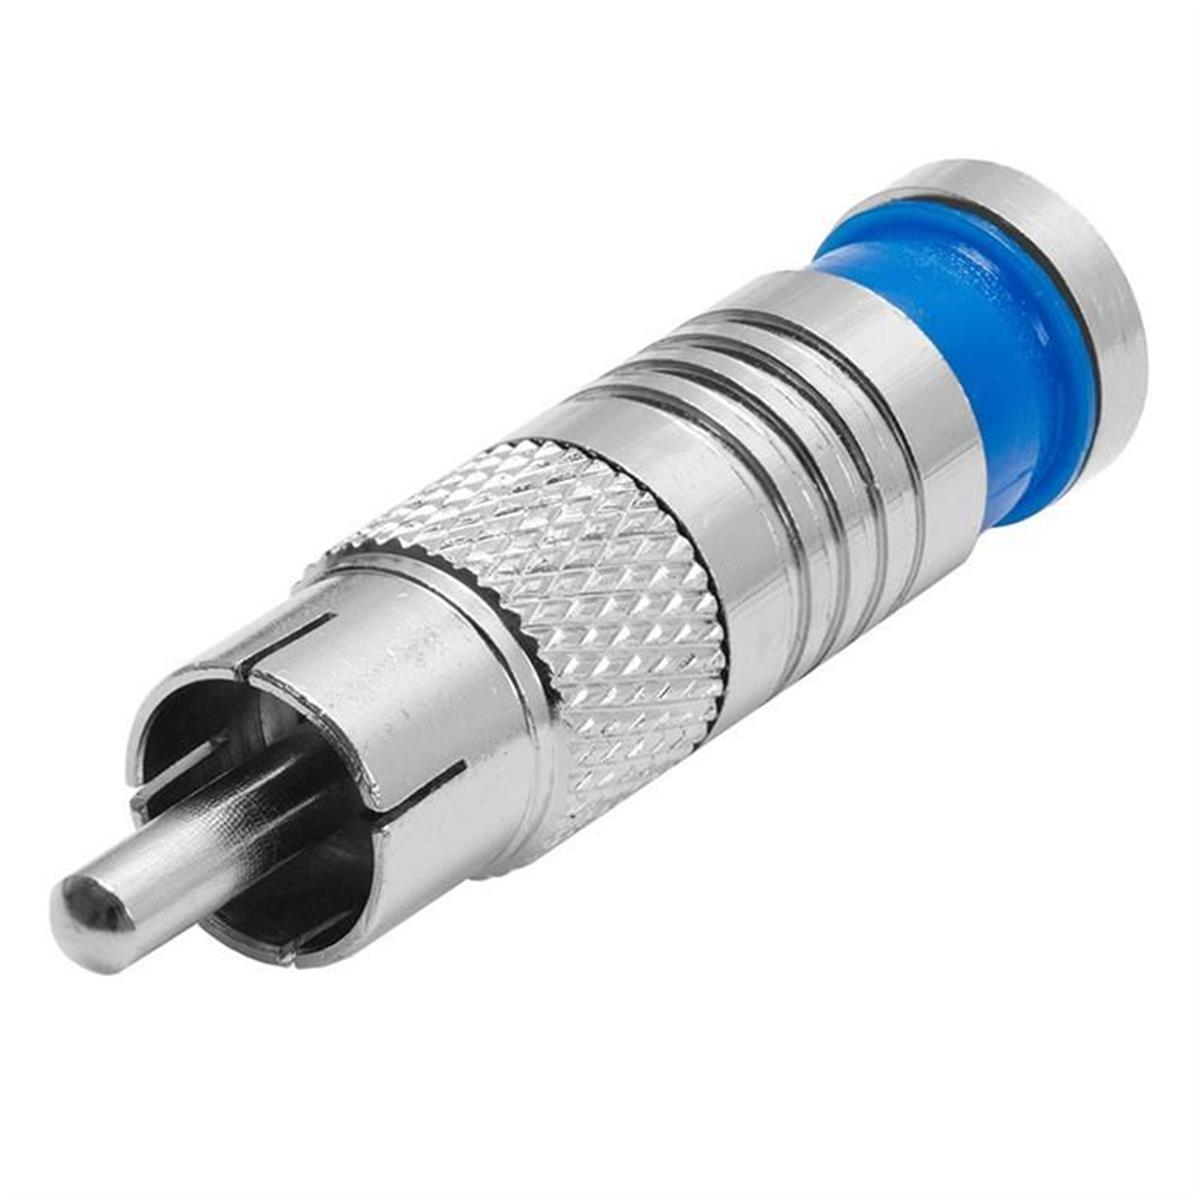 Picture of CMPLE 1182-N Premium RCA Compression Connector for RG59